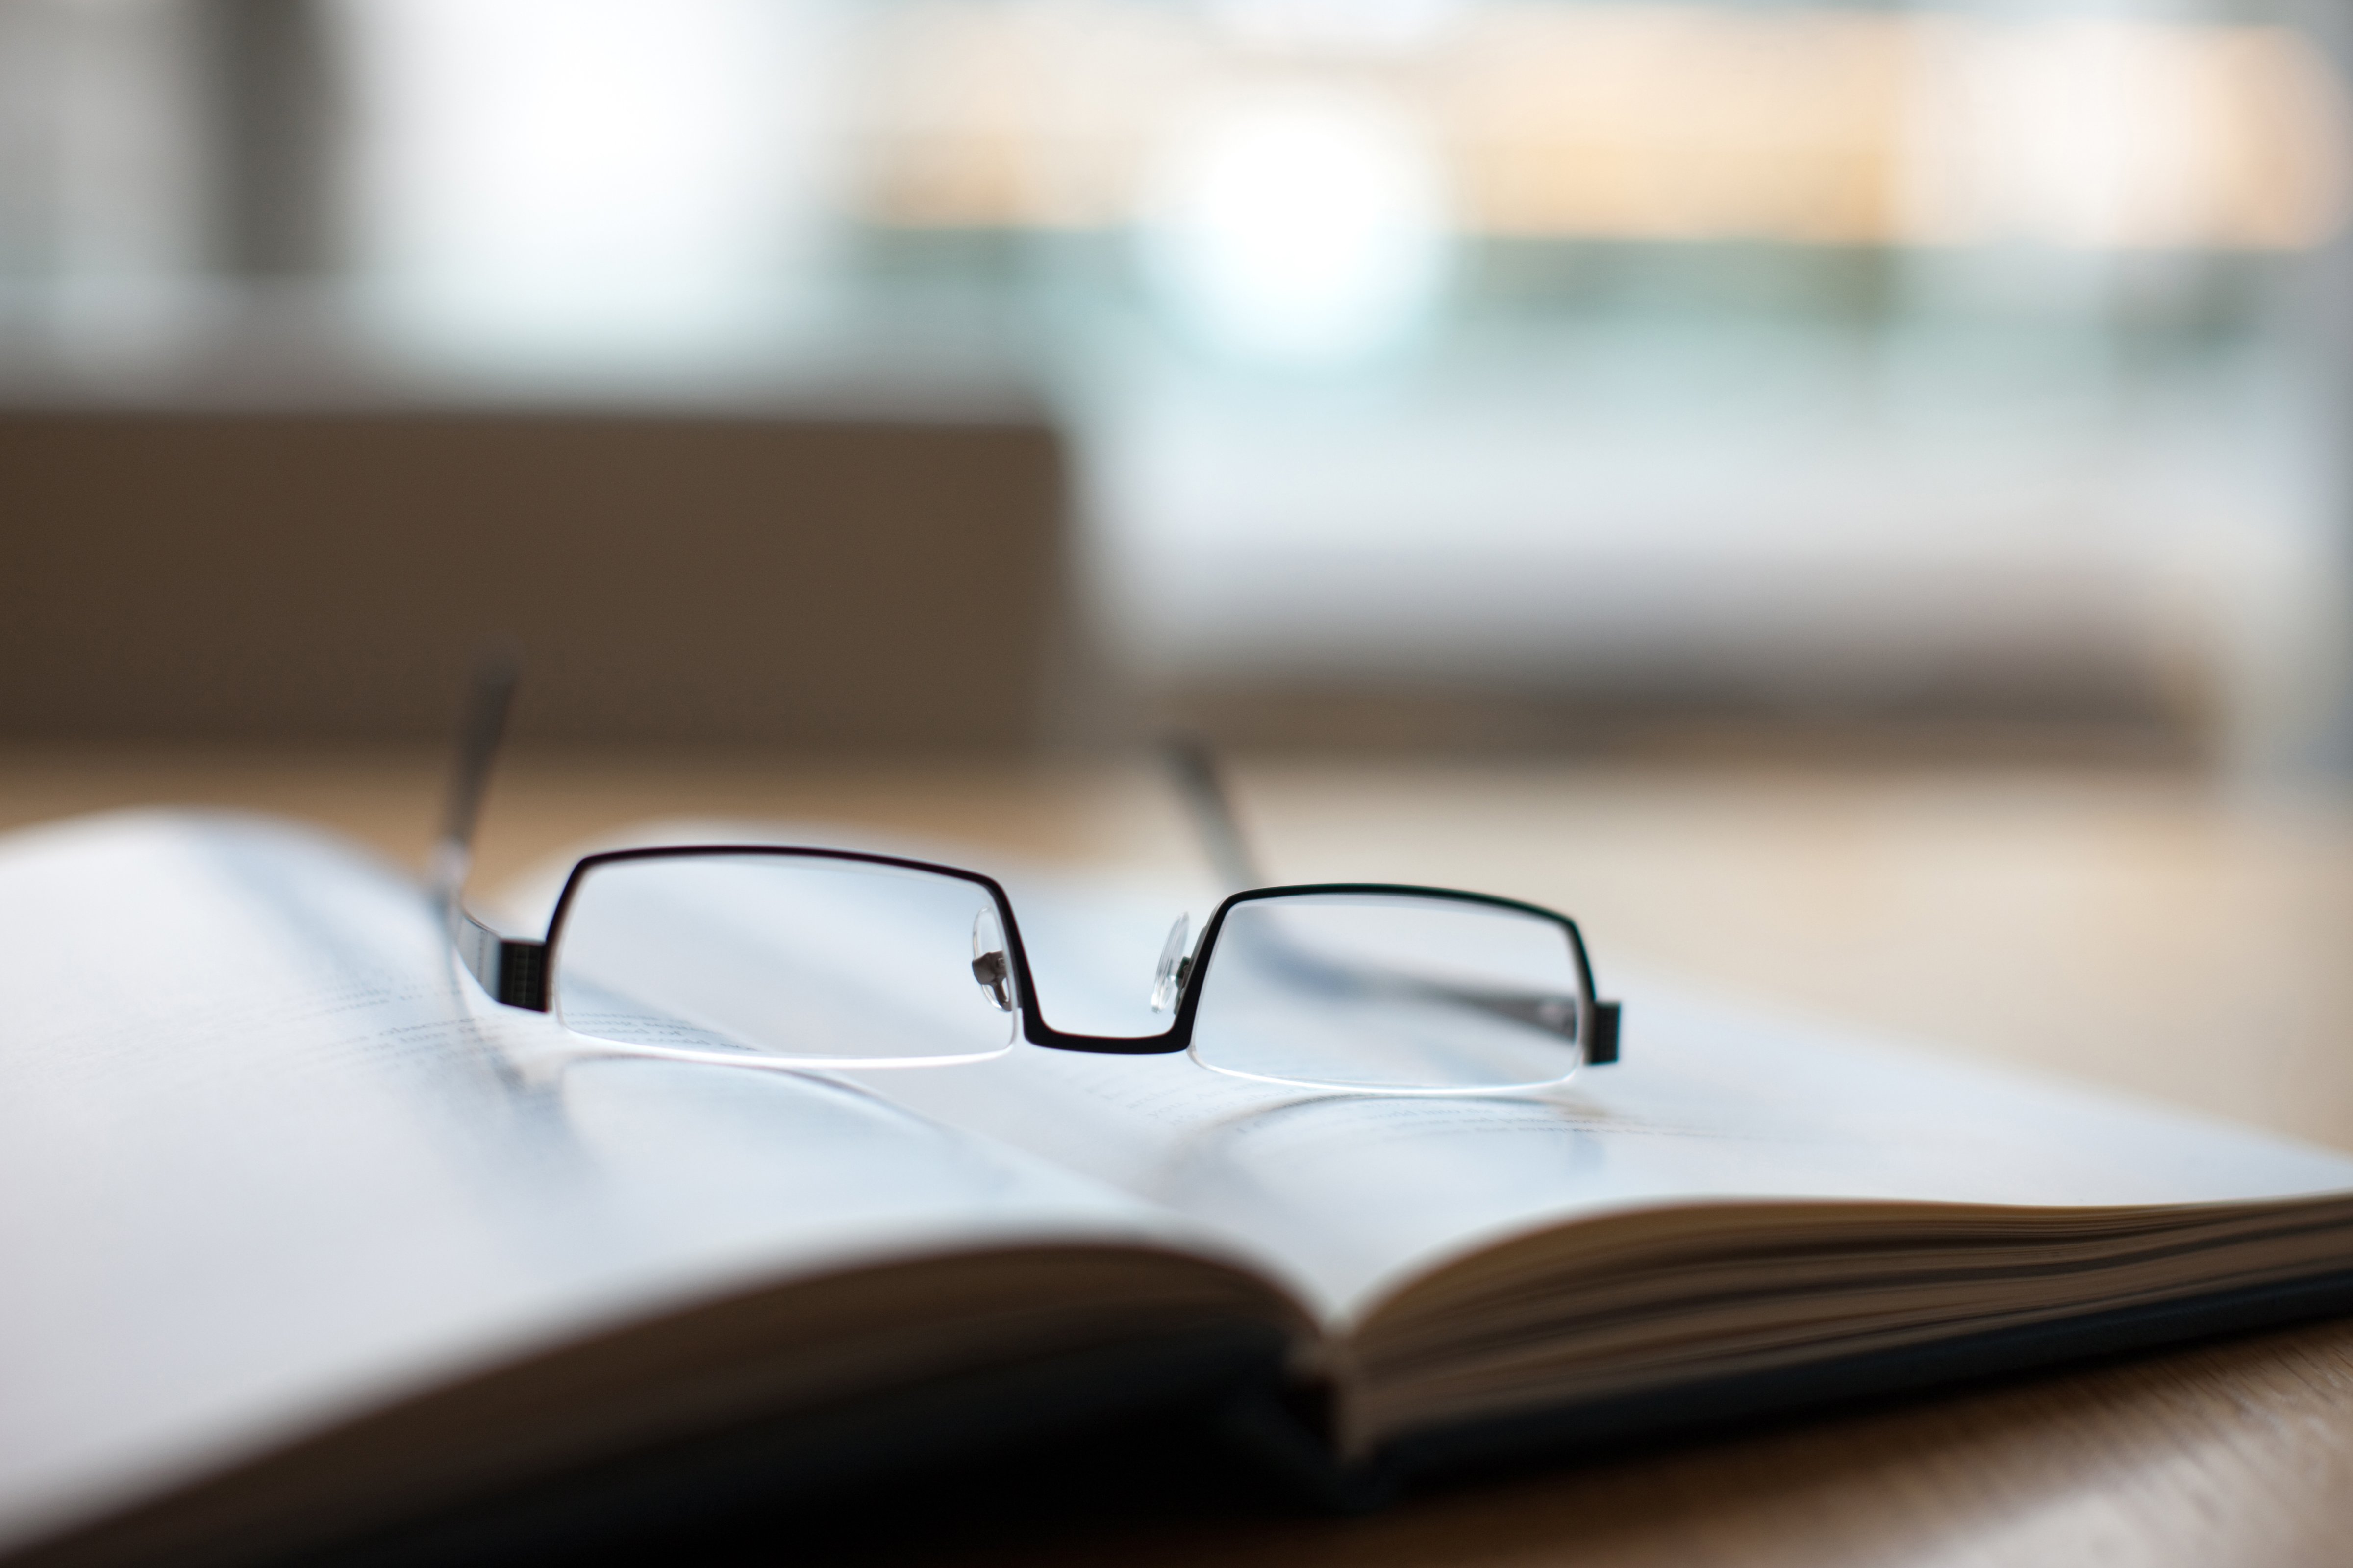 Eyeglasses and book on conference table